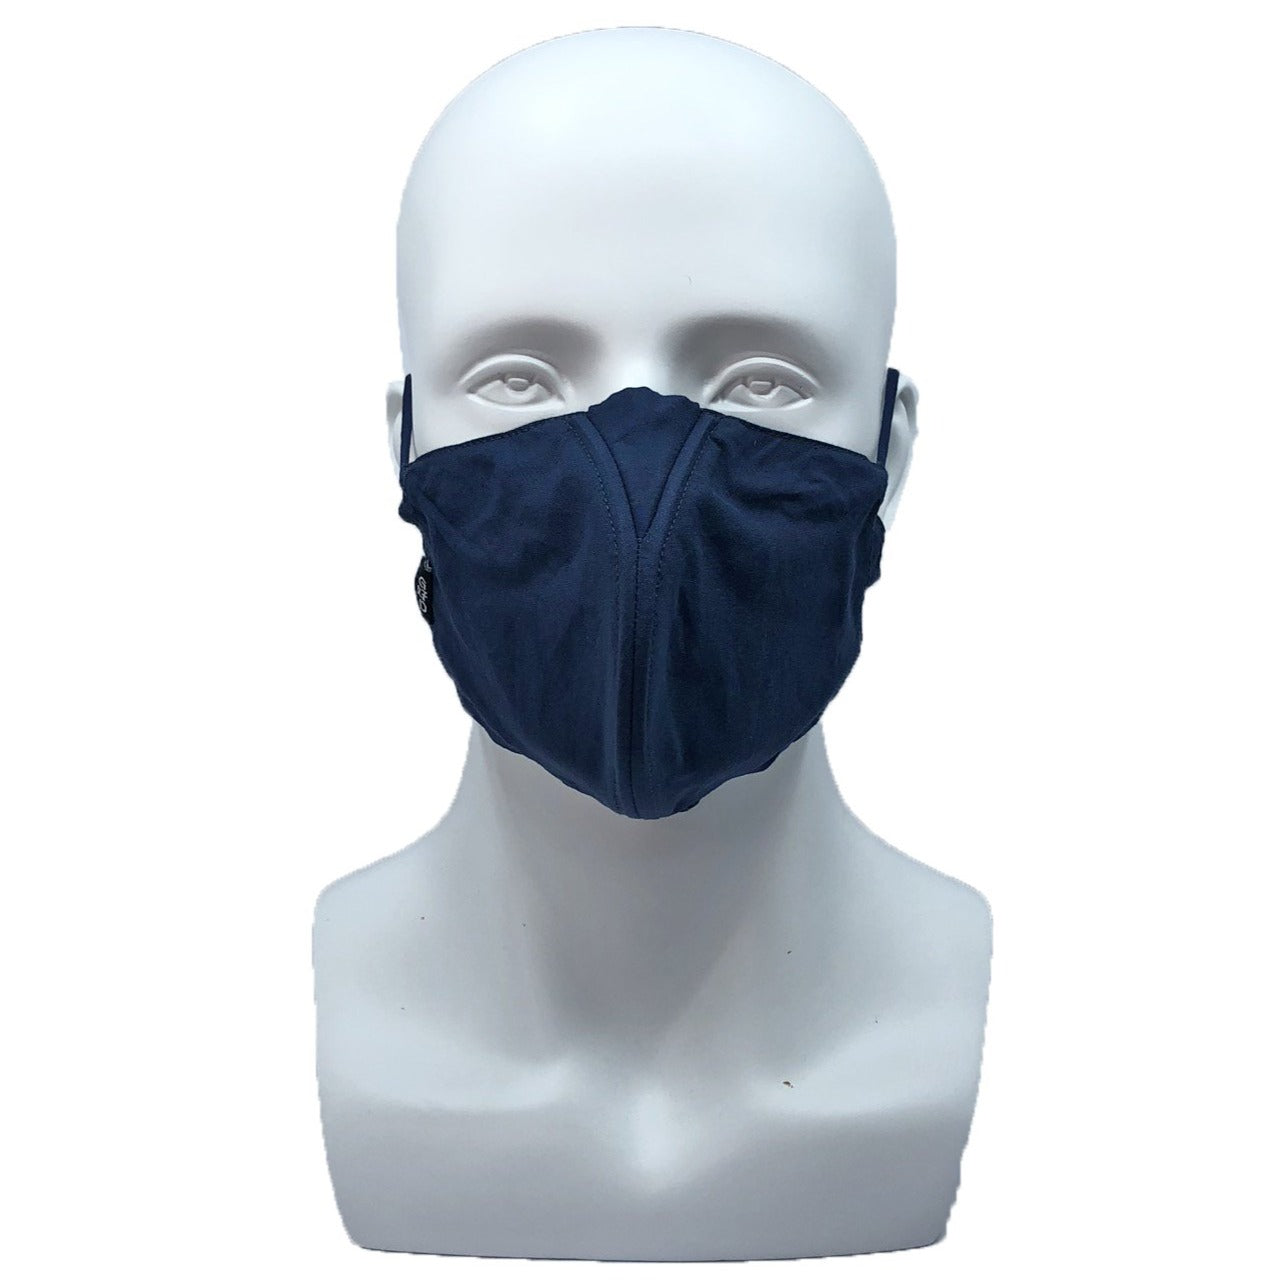 Solid Why-Y Fabric Mask, Navy Blue